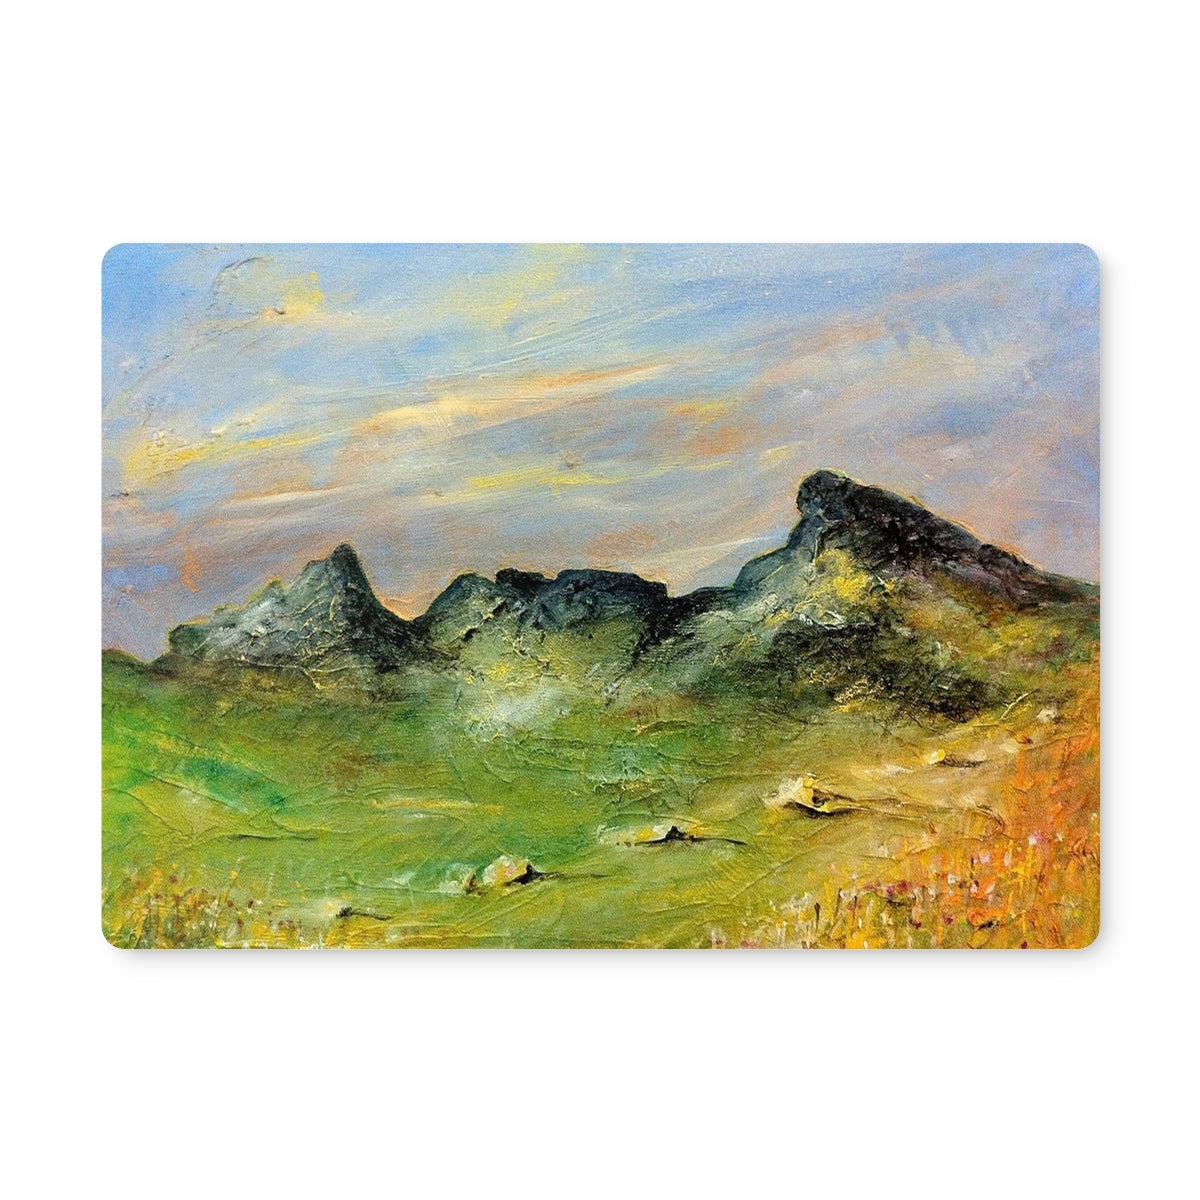 The Cobbler Art Gifts Placemat-Placemats-Scottish Lochs & Mountains Art Gallery-Single Placemat-Paintings, Prints, Homeware, Art Gifts From Scotland By Scottish Artist Kevin Hunter